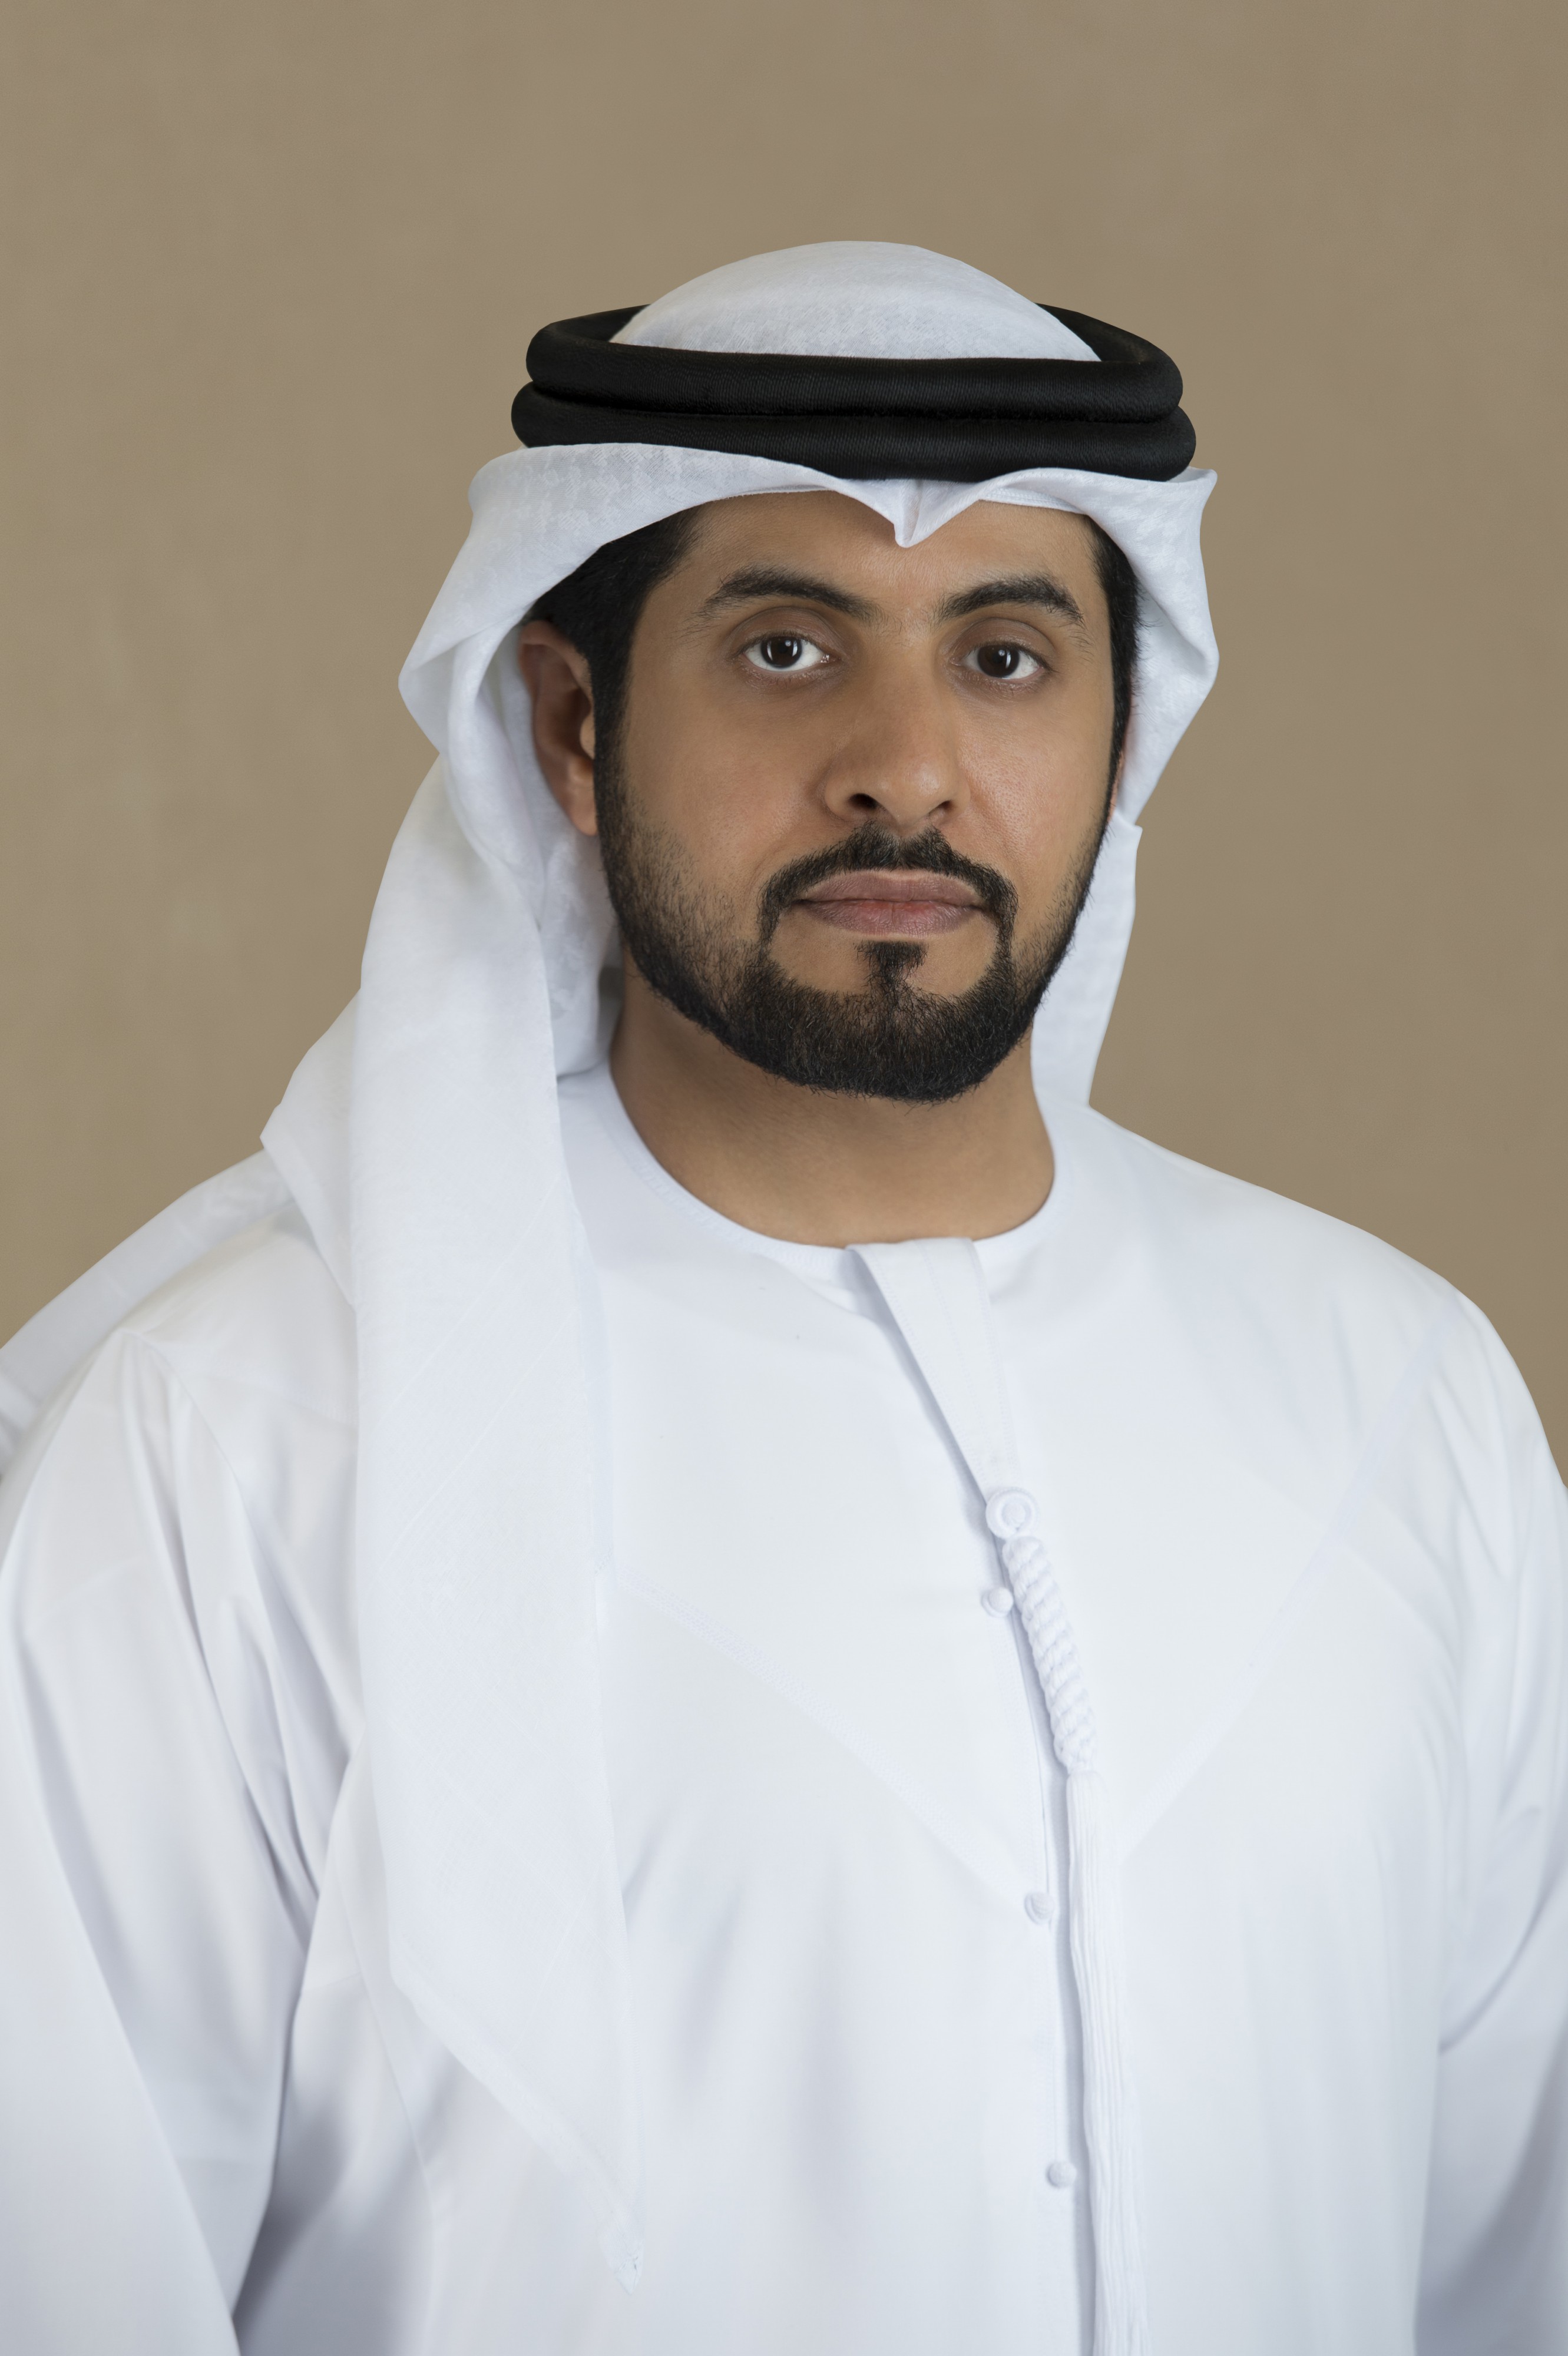 Abu Dhabi Securities Exchange (ADX) Announces Issuing The First Sustainability Report During The First Half Of 2020